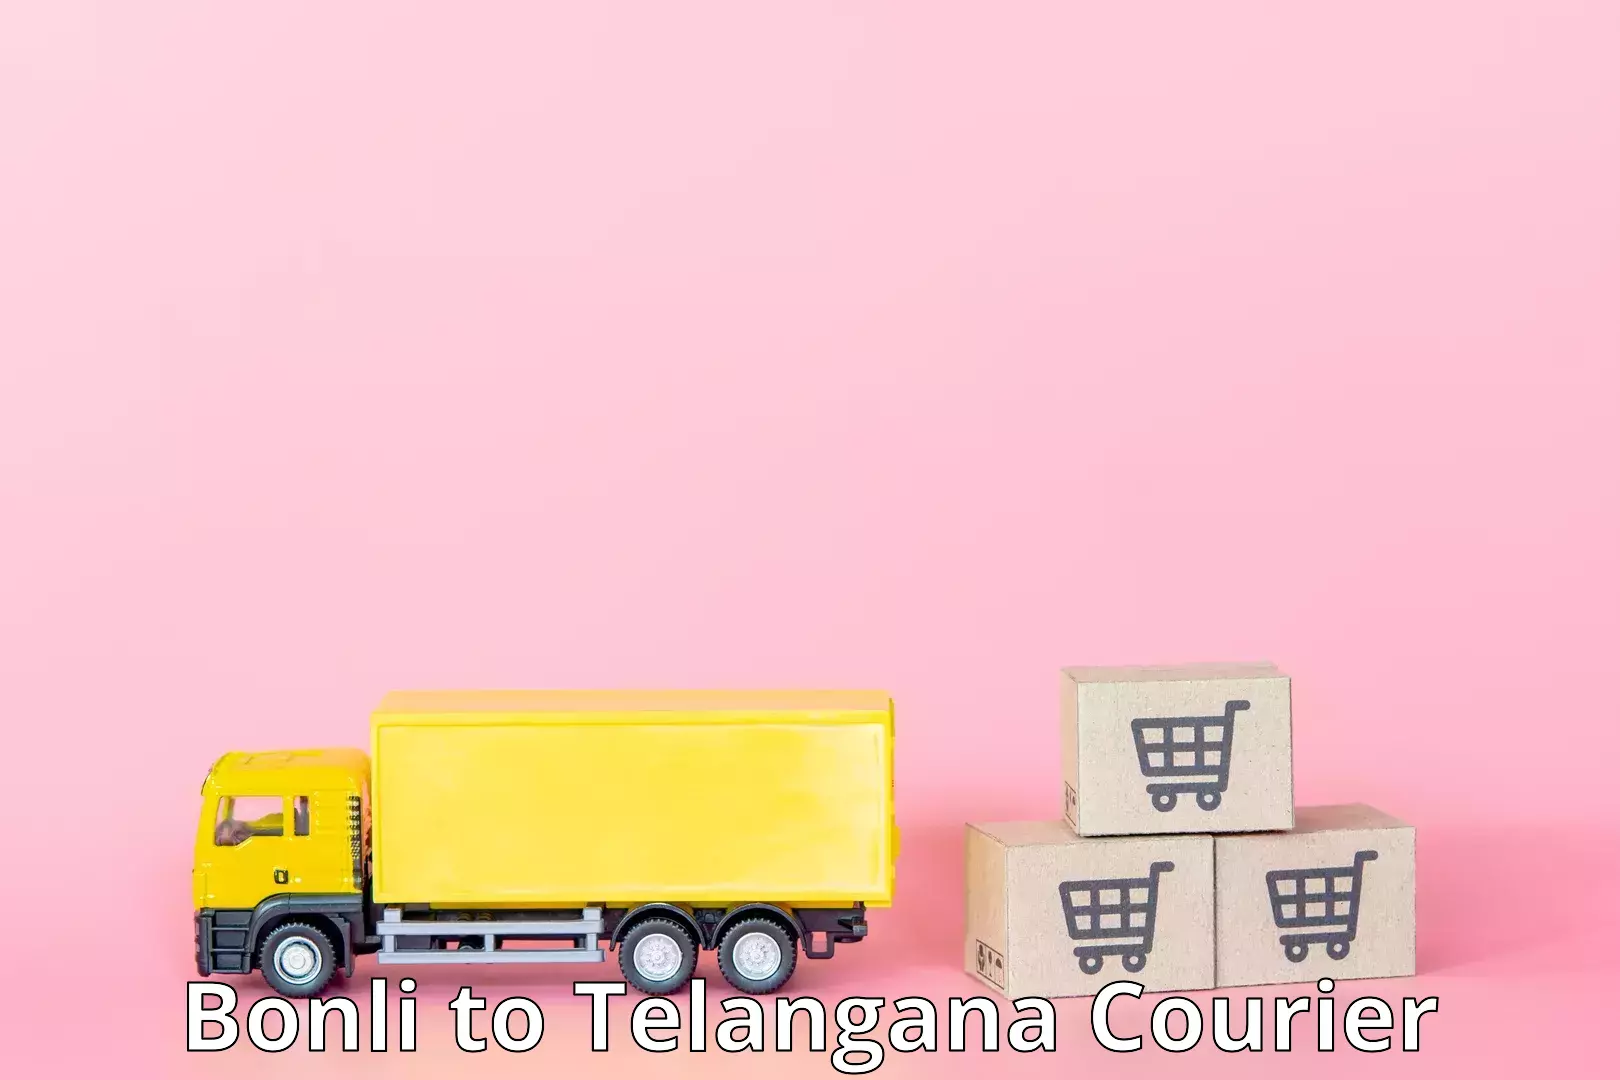 Reliable courier service in Bonli to Gollapalli